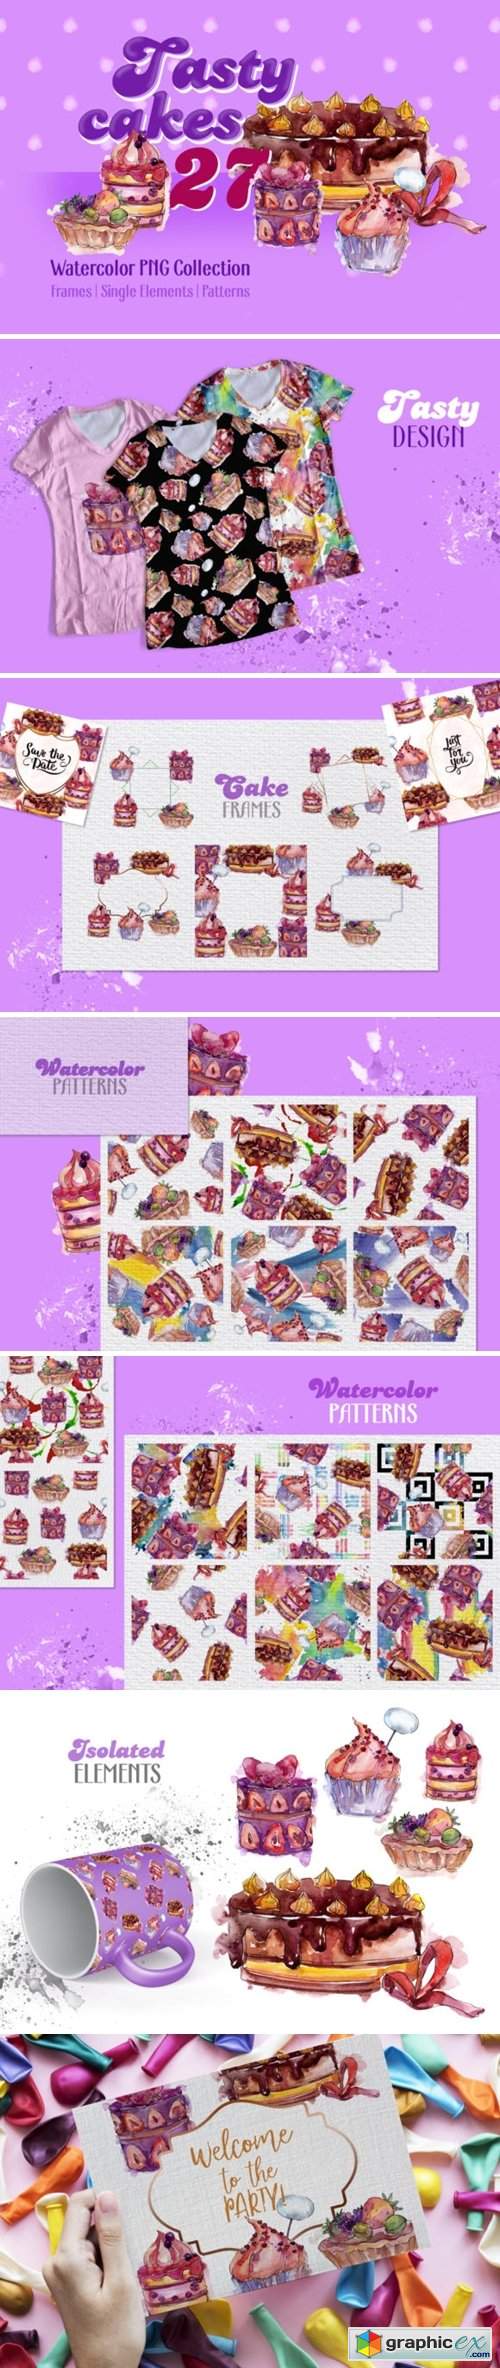 Tasty cakes violet Watercolor png